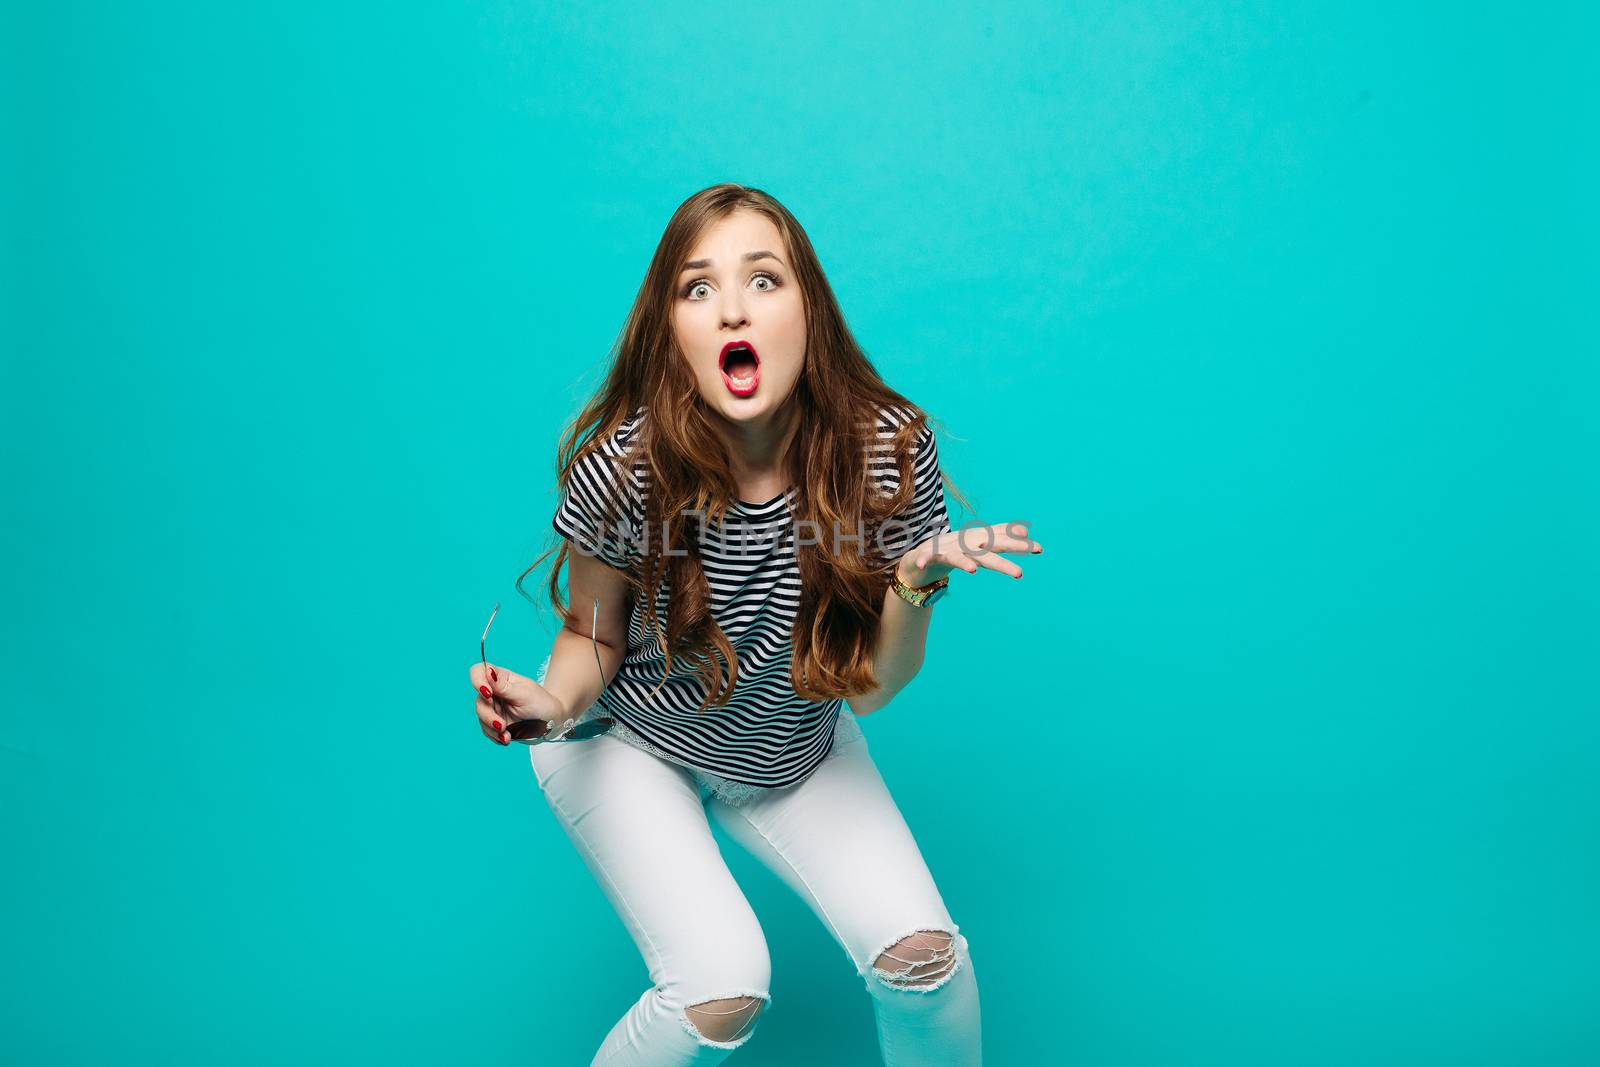 Emotionally brunette girl with long hair, stylish wearing in blouse and white jeans, gesturing by hands, shocking looking, screaming at camera. Woman surprised posing with opened mouth. Blue background.